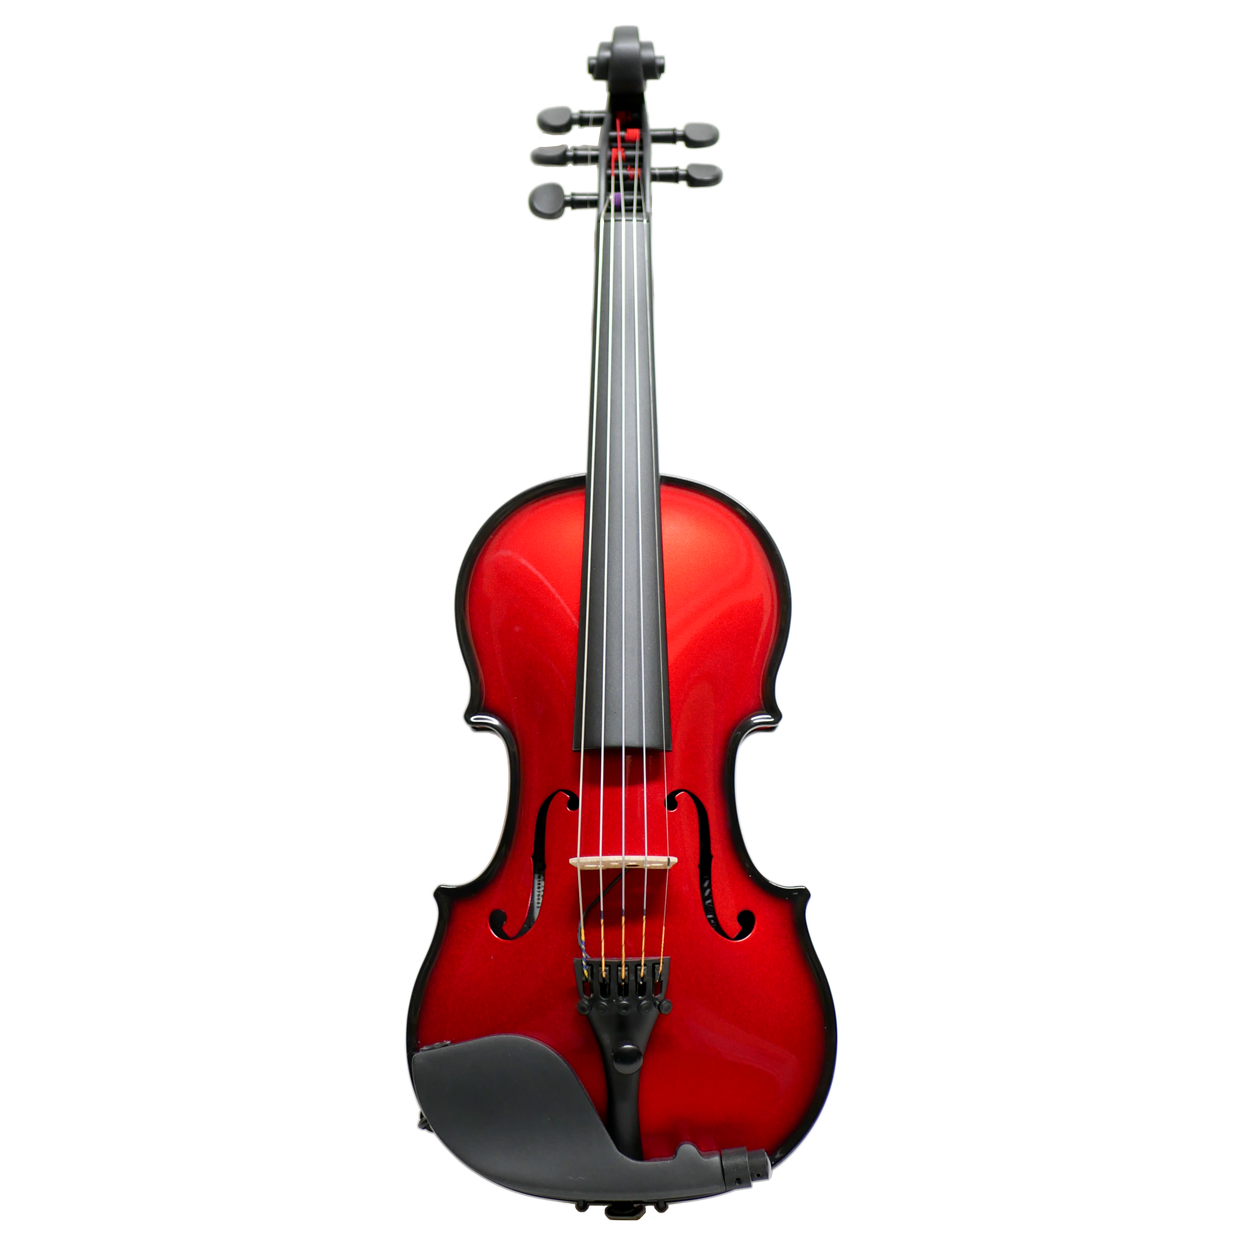 AEX Carbon Violin, 5 Strings, red